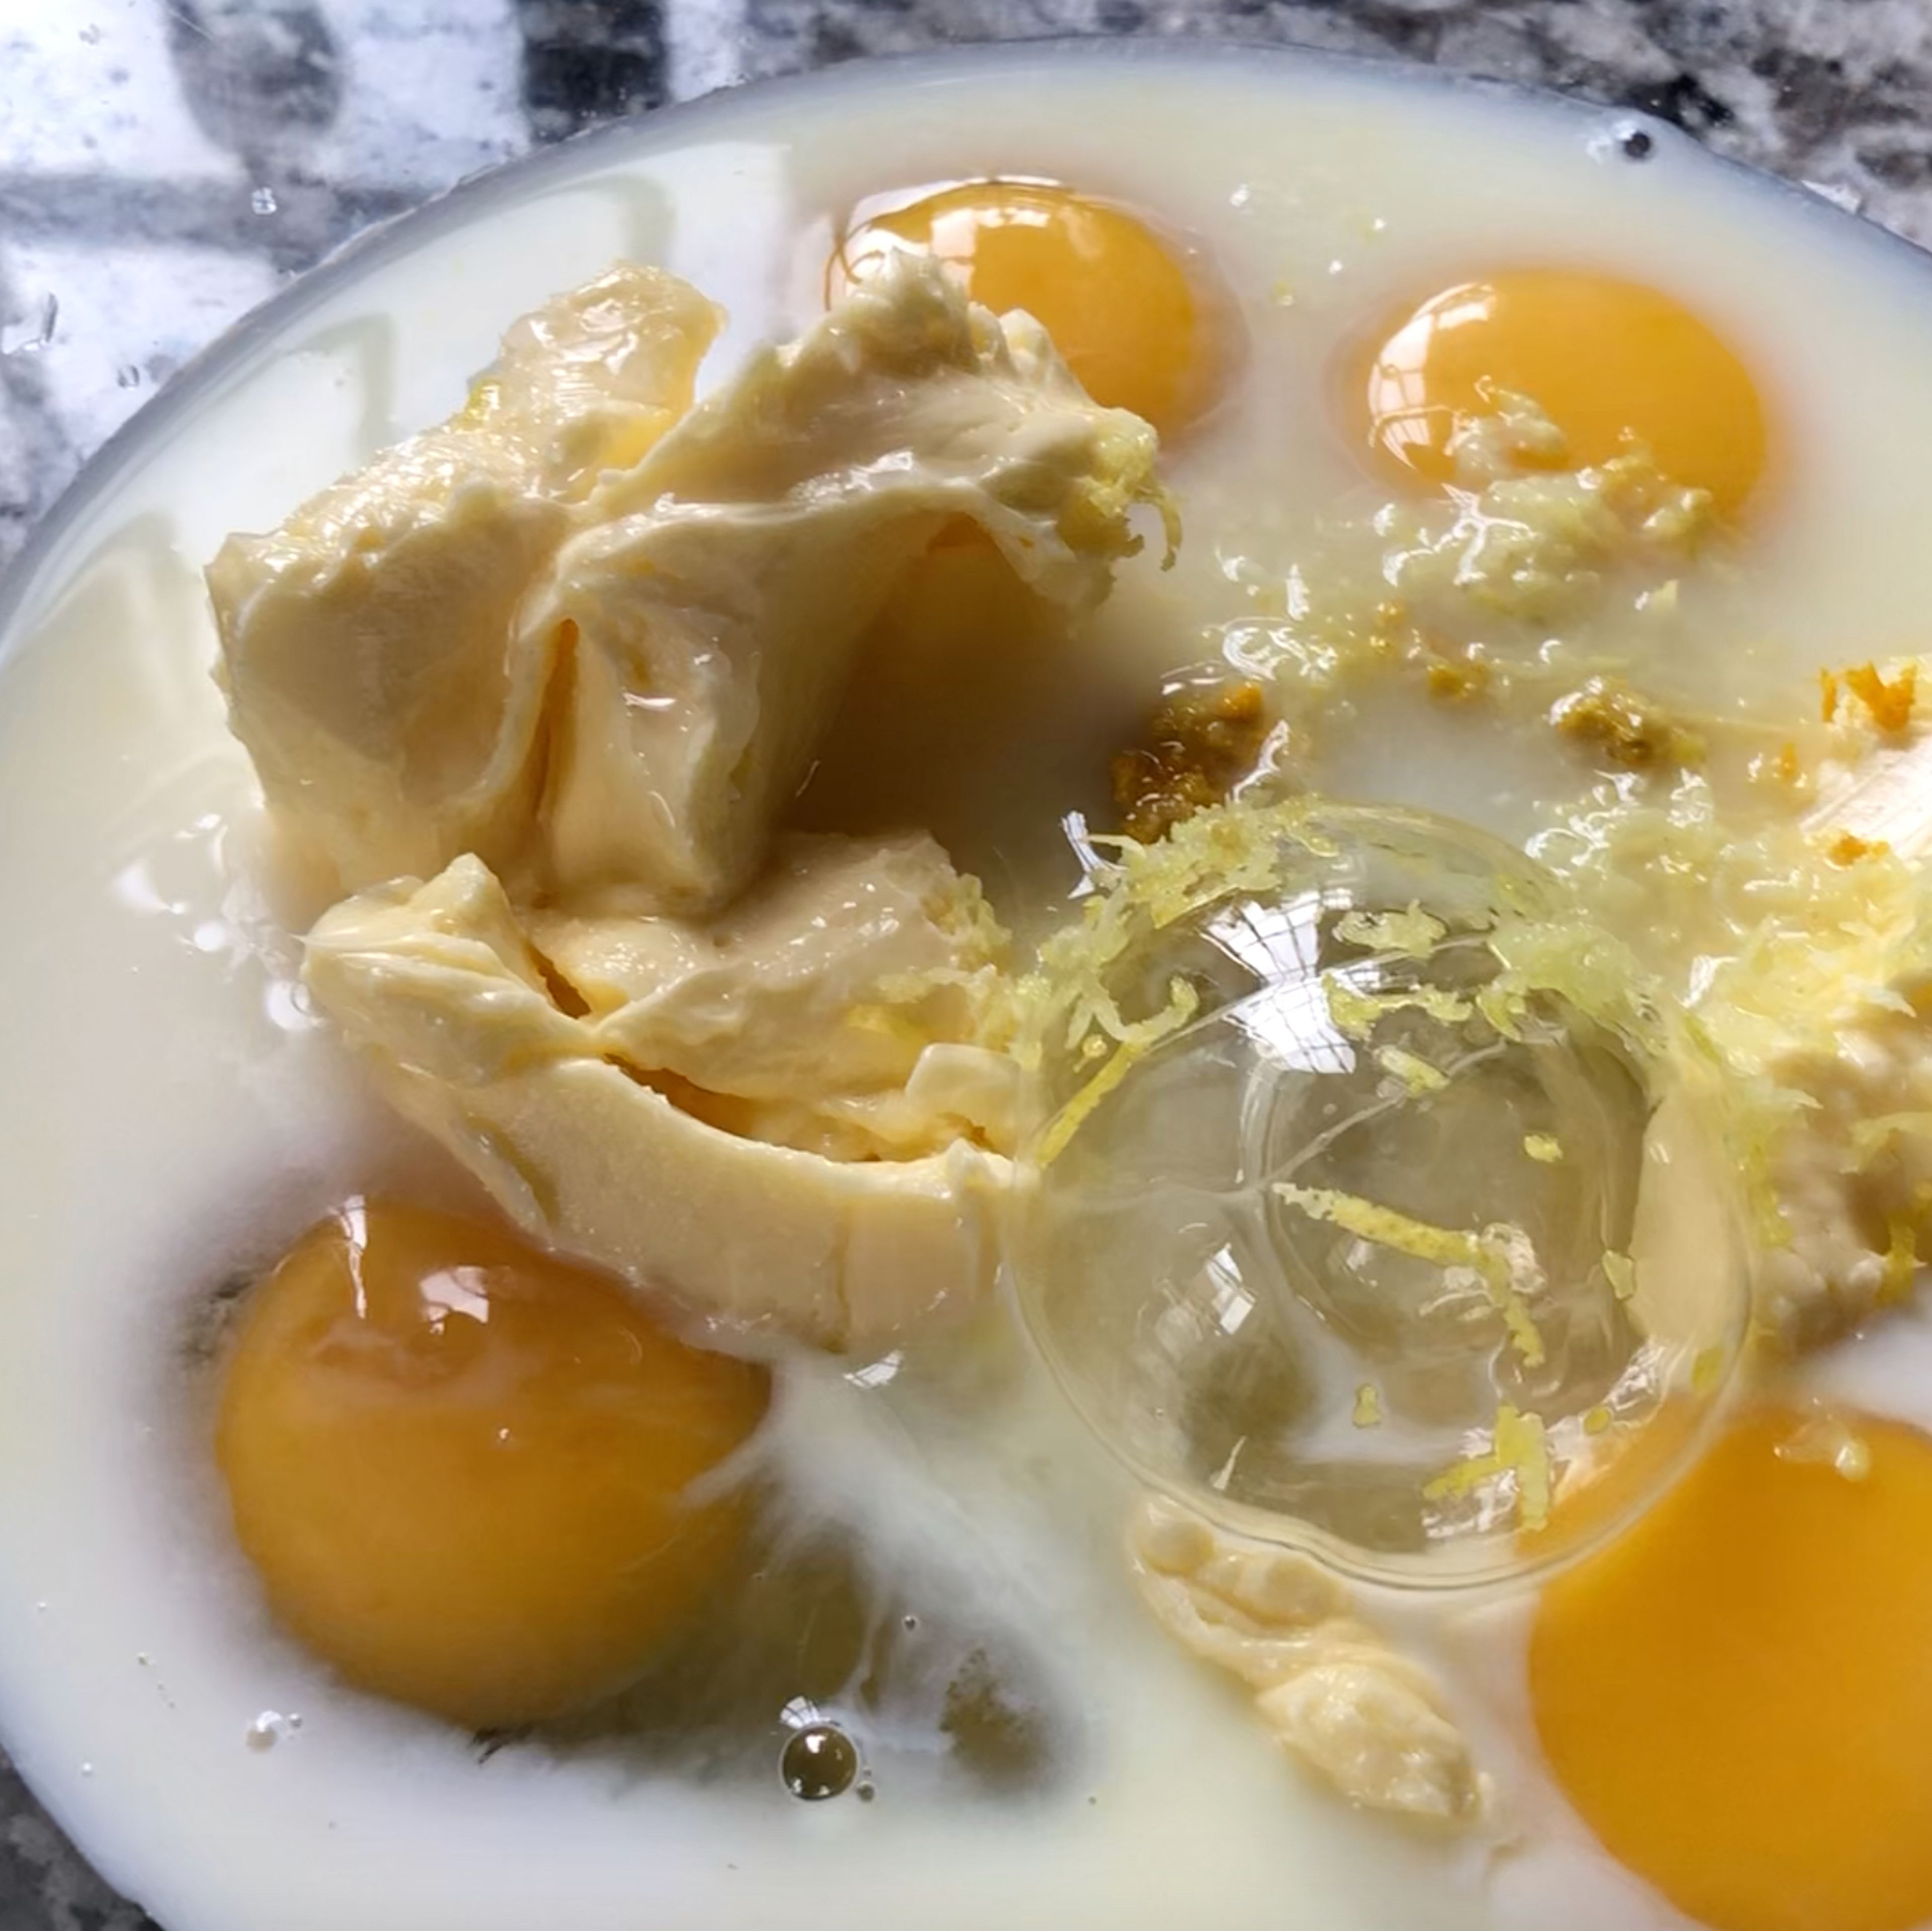 Meanwhile, put the wet ingredients in another bowl. Sugar, eggs, milk, room temperature butter, lemon zest, orange blossom water and vainilla essence.